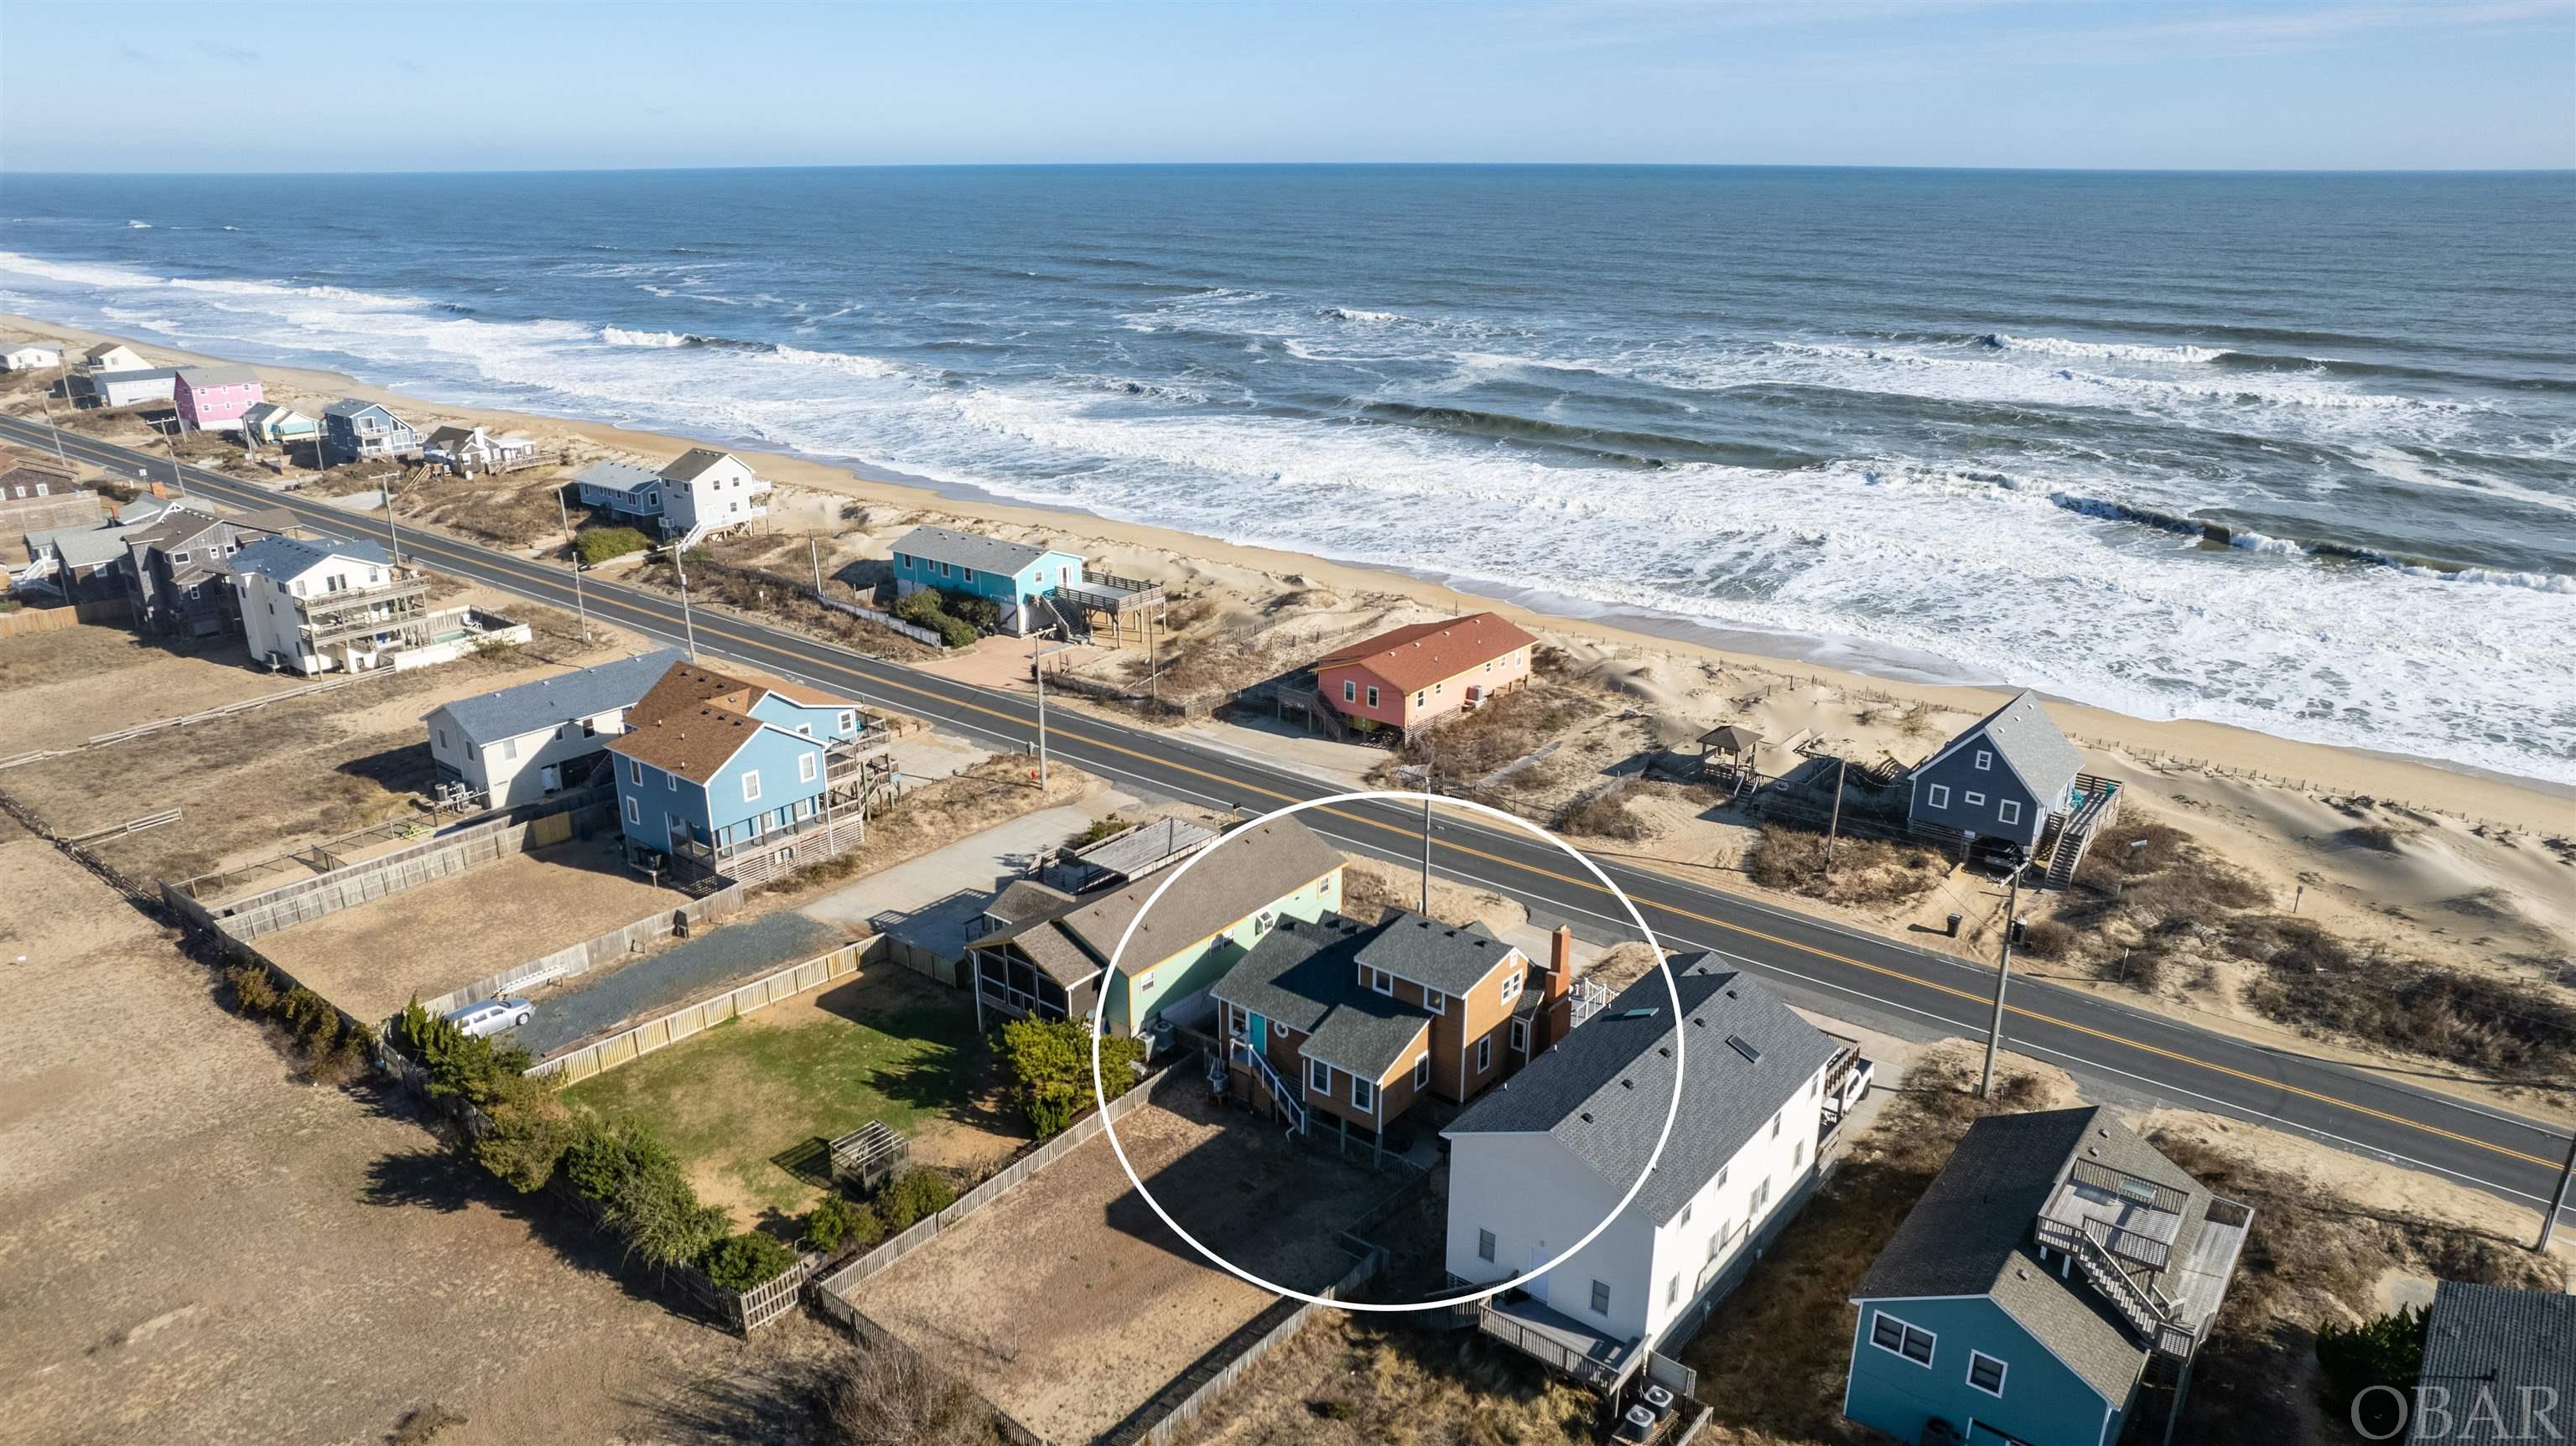 Enjoy Oceanfront views that will never change and great beach access without the risk of being right on the Oceanfront! 'The View Cottage' is truly one of a kind and has been renovated over the years, keeping its charm and character while adding modern conveniences.  The effective age is much newer than 1950, and it sleeps like a 4 bedroom (sleeps 10!).  The large ocean view window and sliders in the living area fill the space with tons of natural light, and you will love all the details throughout like the bead board ceilings, original doors, and gas fireplace with tongue and groove wood work.  The kitchen was remodeled by Ken Green and showcases Geos recycled glass counters, a wet bar with wine cooler, glass front cabinet doors, and a custom pull out pantry.  The main level also features a Queen primary bedroom with en-suite bath, a double bunk room, a full hallway bathroom, custom built ins, and a laundry area.  Relax on the brand new oversized front deck with new hot tub where you will experience beautiful ocean views, sunrises, and gorgeous moon lit nights over the ocean. You will be so close to the ocean that you may see dolphin right from the front deck on any given day!  The 2nd level offers 2 additional bedrooms (Queen and Full) that share a hallway half bath.  You will find plenty of storage with lots of closet space throughout, and a pull down attic with flooring and Thermax insulation.  The front Ocean view sun deck offers plenty of seating with quality polywood furniture, and the exterior carport area provides a great shaded additional outdoor living space with a sofa, table and chairs, picnic table, and outdoor shower.  Hurricane shutters on the front windows and doors offer added built-in protection when needed. The fenced in backyard is perfect for lawn games, and you will find everything you need in the utility shed from corn hole boards to beach gear and a beach cart to carry everything over to the beach!  You will fall in love with this adorable cottage that offers all the comforts of home and an absolutely ideal location in Kitty Hawk.  You will never lose your Ocean views as the vacant Oceanfront lots are not buildable.  Over 10% estimated gross rental return with up to $106K projected for the 2024 season!  Recent upgrades include a NEW exterior electrical service panel and new water heater '22, NEW smart tv's, and a brand NEW front and back deck with trex, NEW deck pilings, NEW hot tub, NEW fortified roof, and NEW main level heat pump in '23. The views are even better in person, and you cannot beat this location in Kitty Hawk!  The owners use a non-deeded beach access a few houses down to the South...see aerial photo for details!